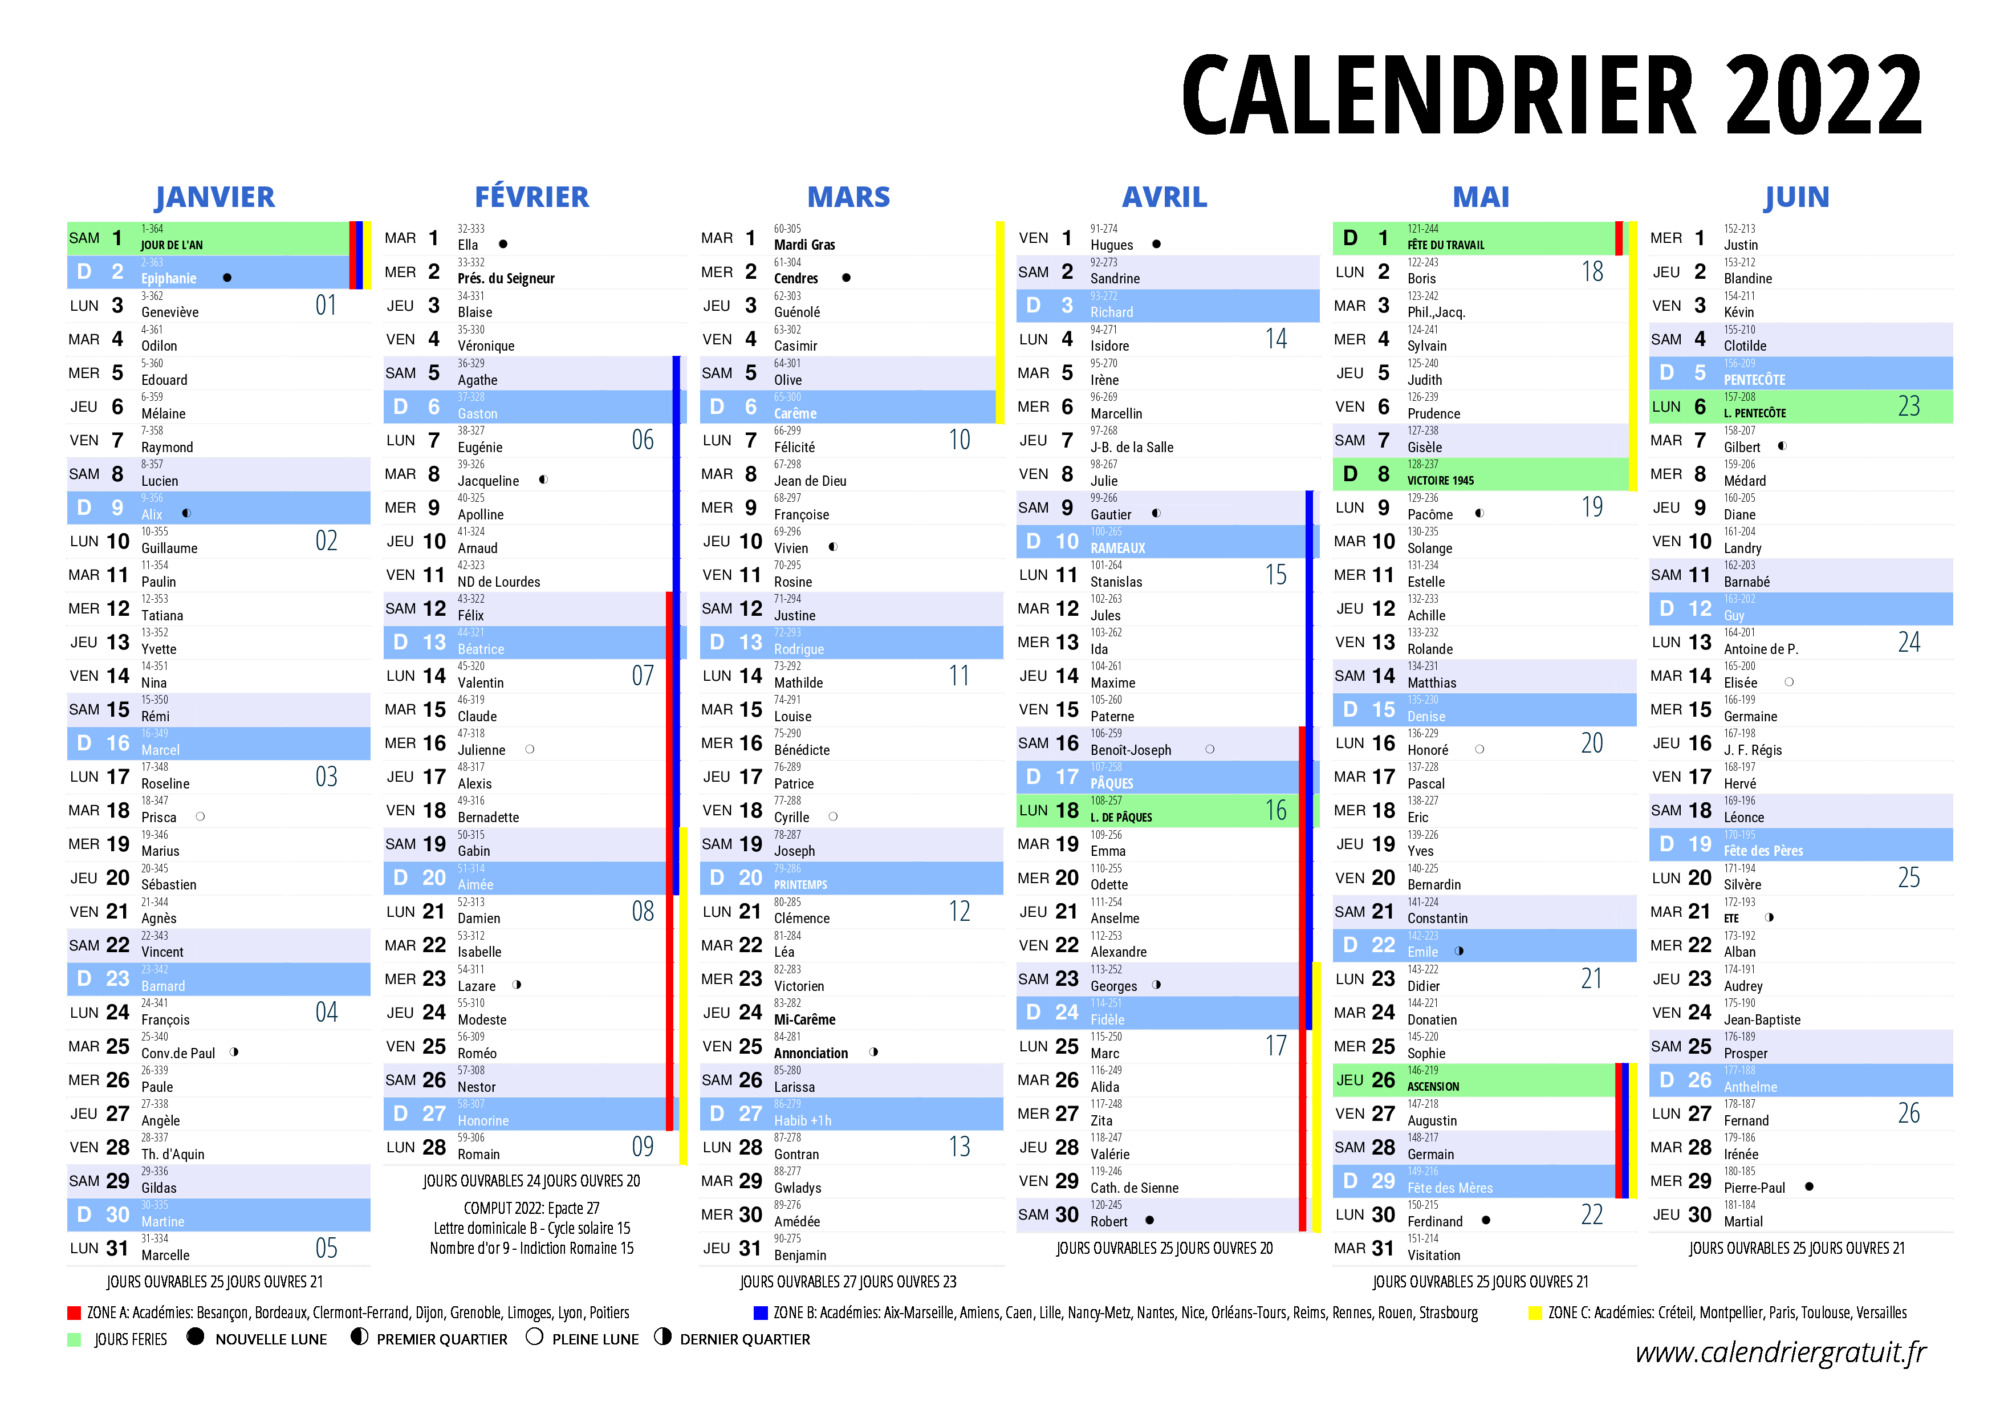 Semaines Calendrier 2022 Calendrier 2022